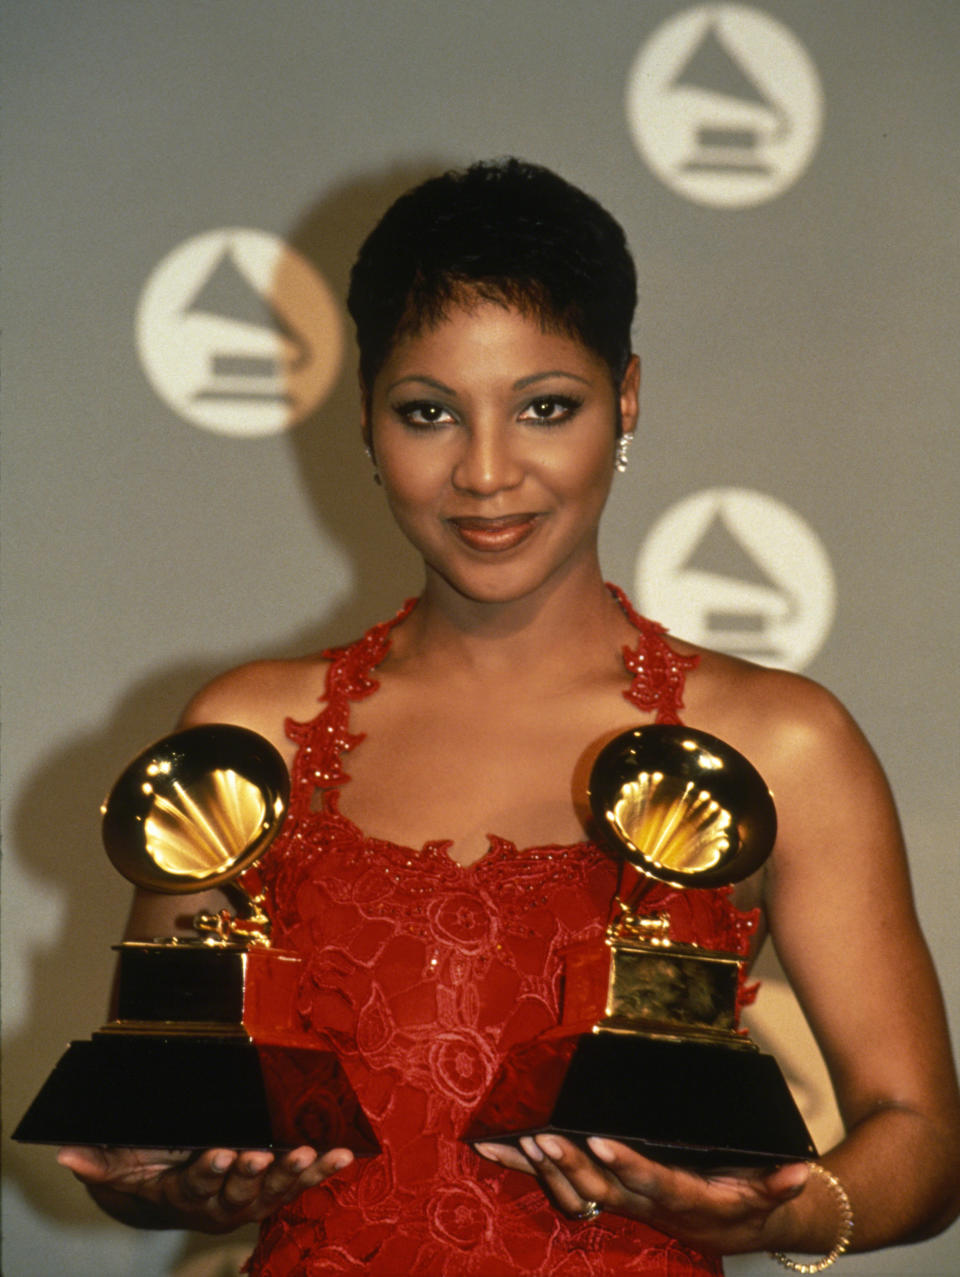 36th Annual Grammy Awards held at Radio City Music Hall (Images Press / Getty Images)